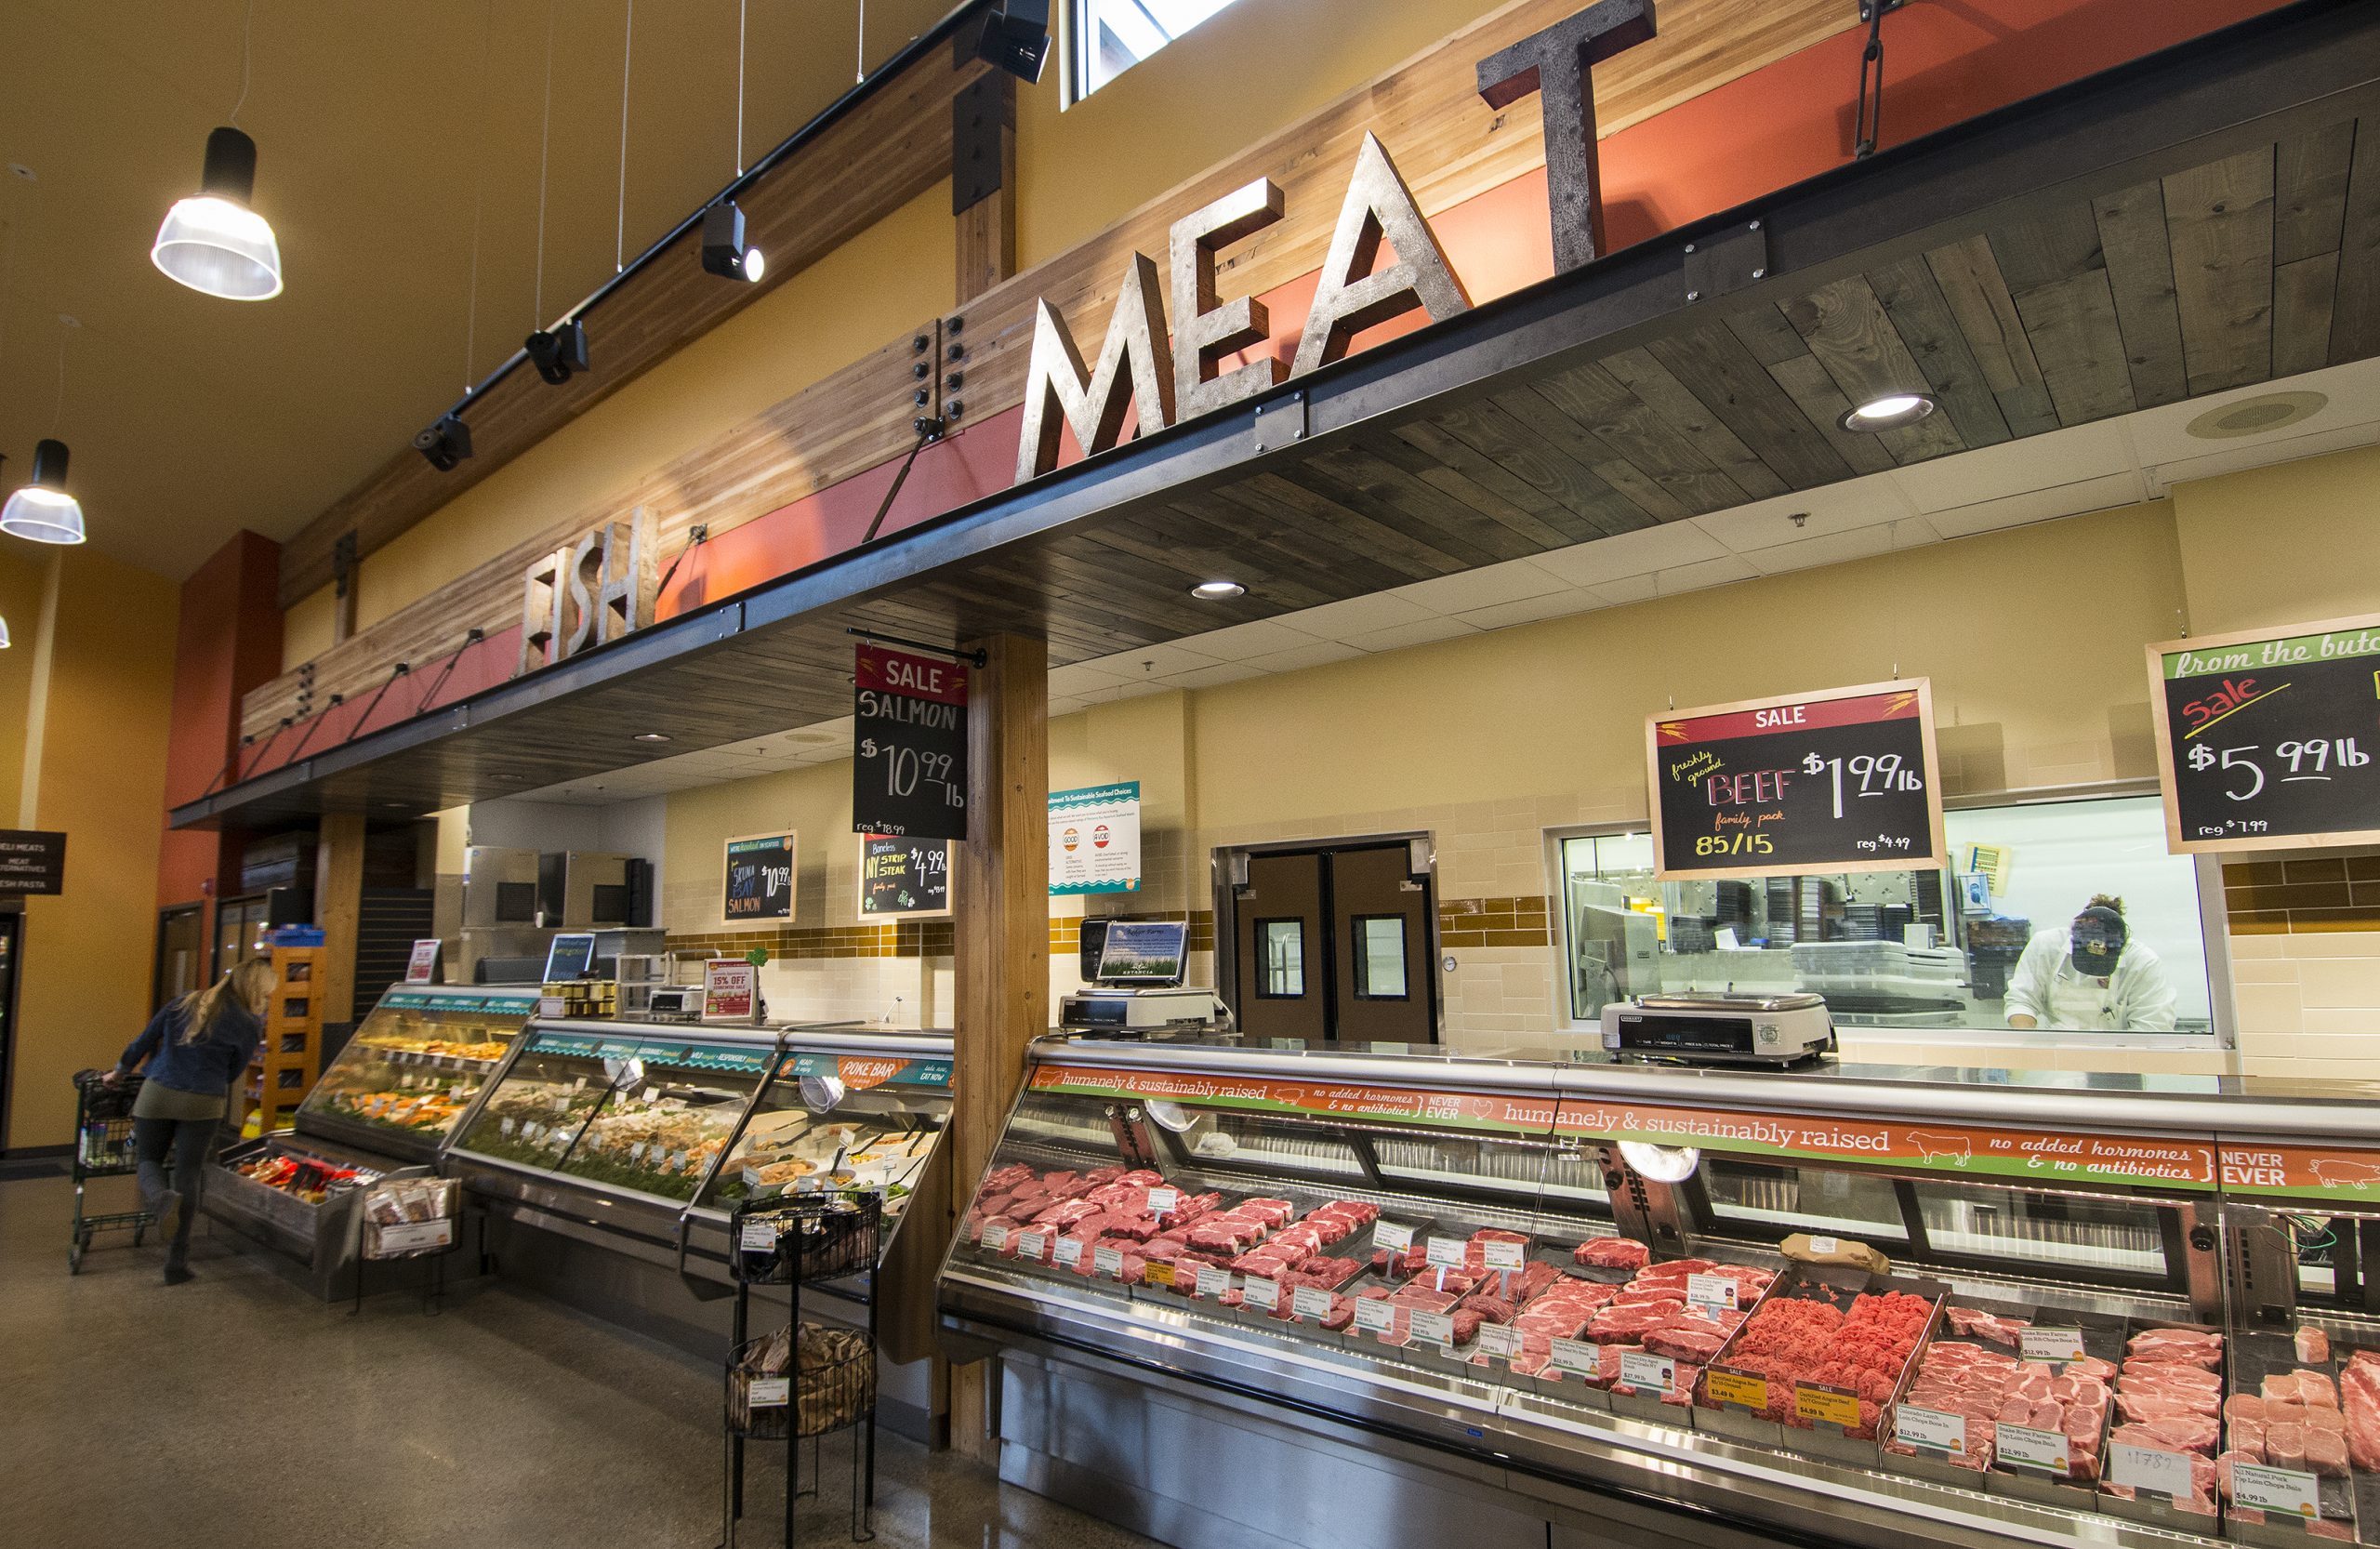 A custom fixture plan gave StoreMasters the opportunity to expand the meat and fish departments